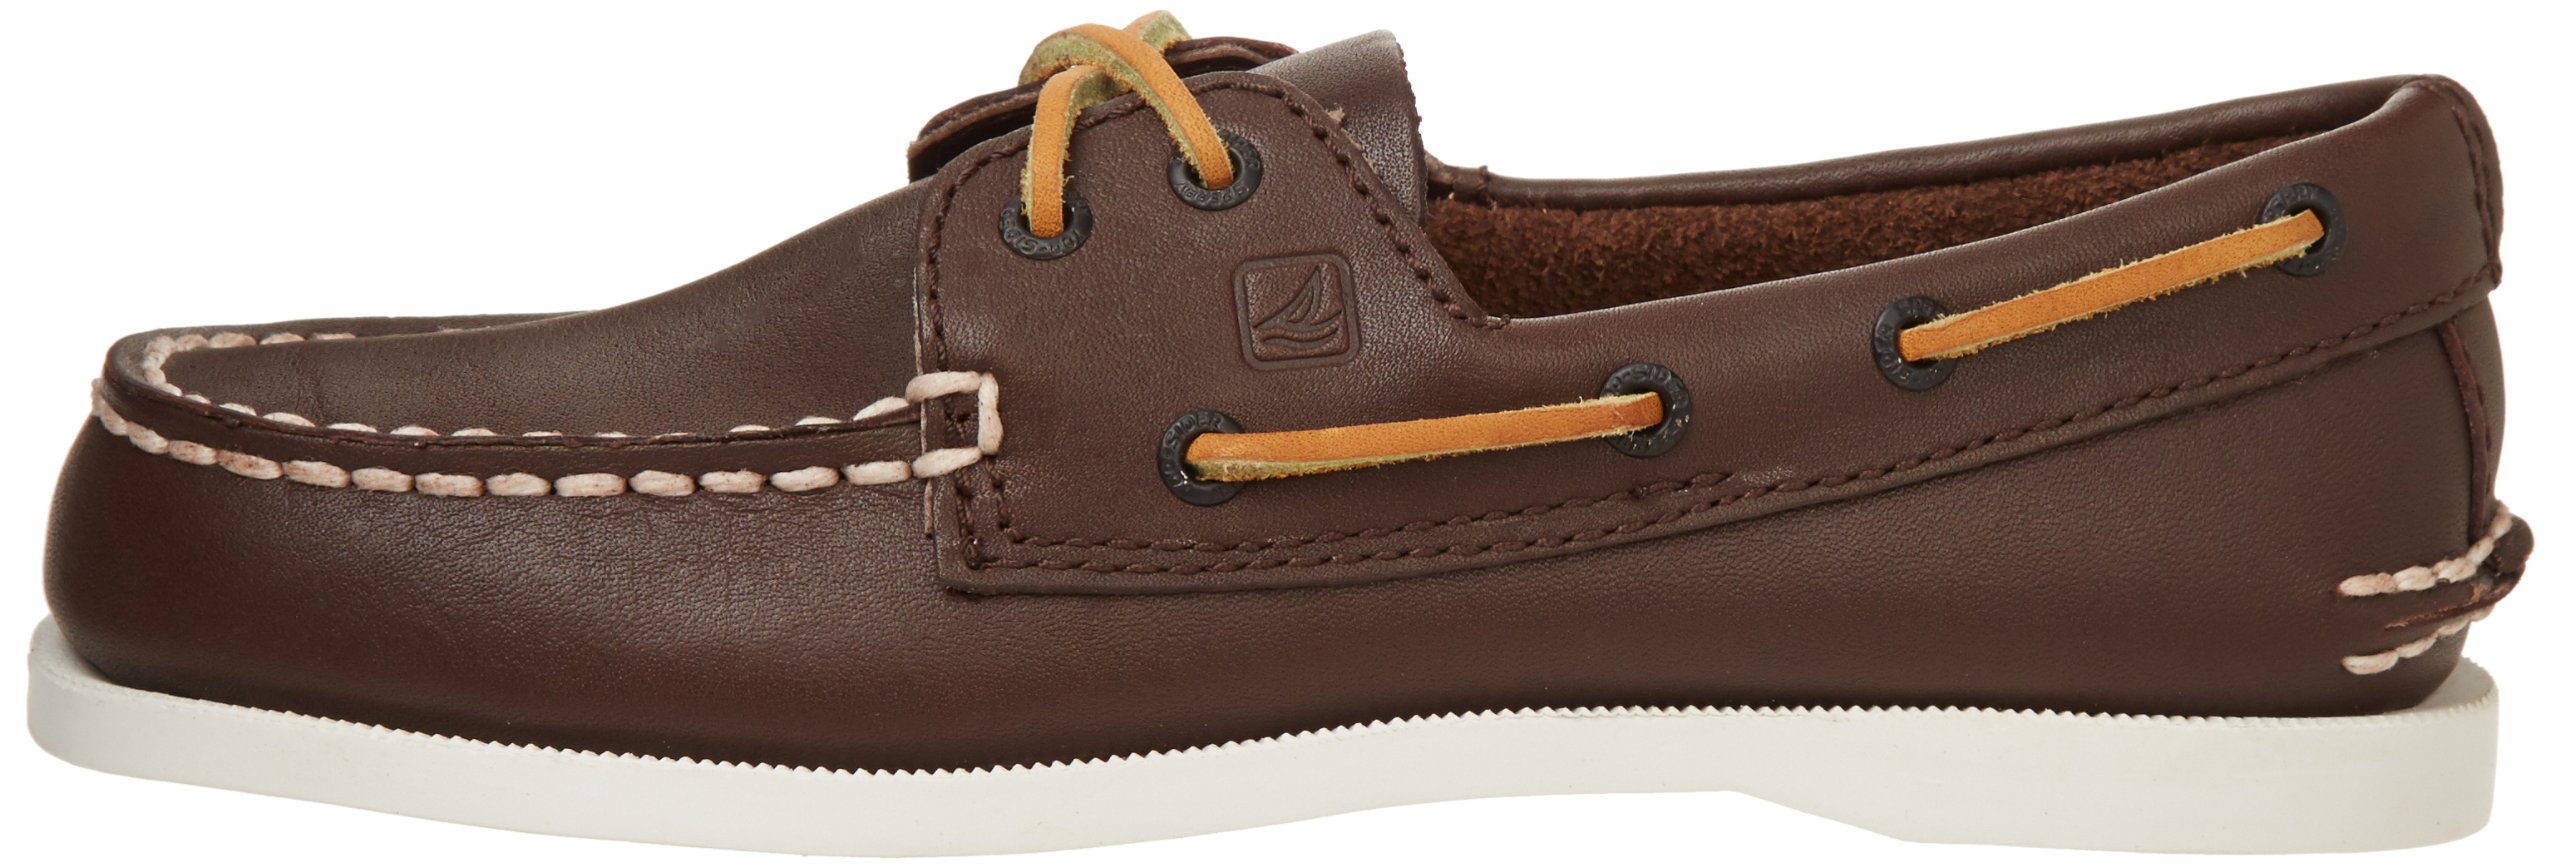 Sperry Kid's Authentic Original Boat Shoe, 6 Youth